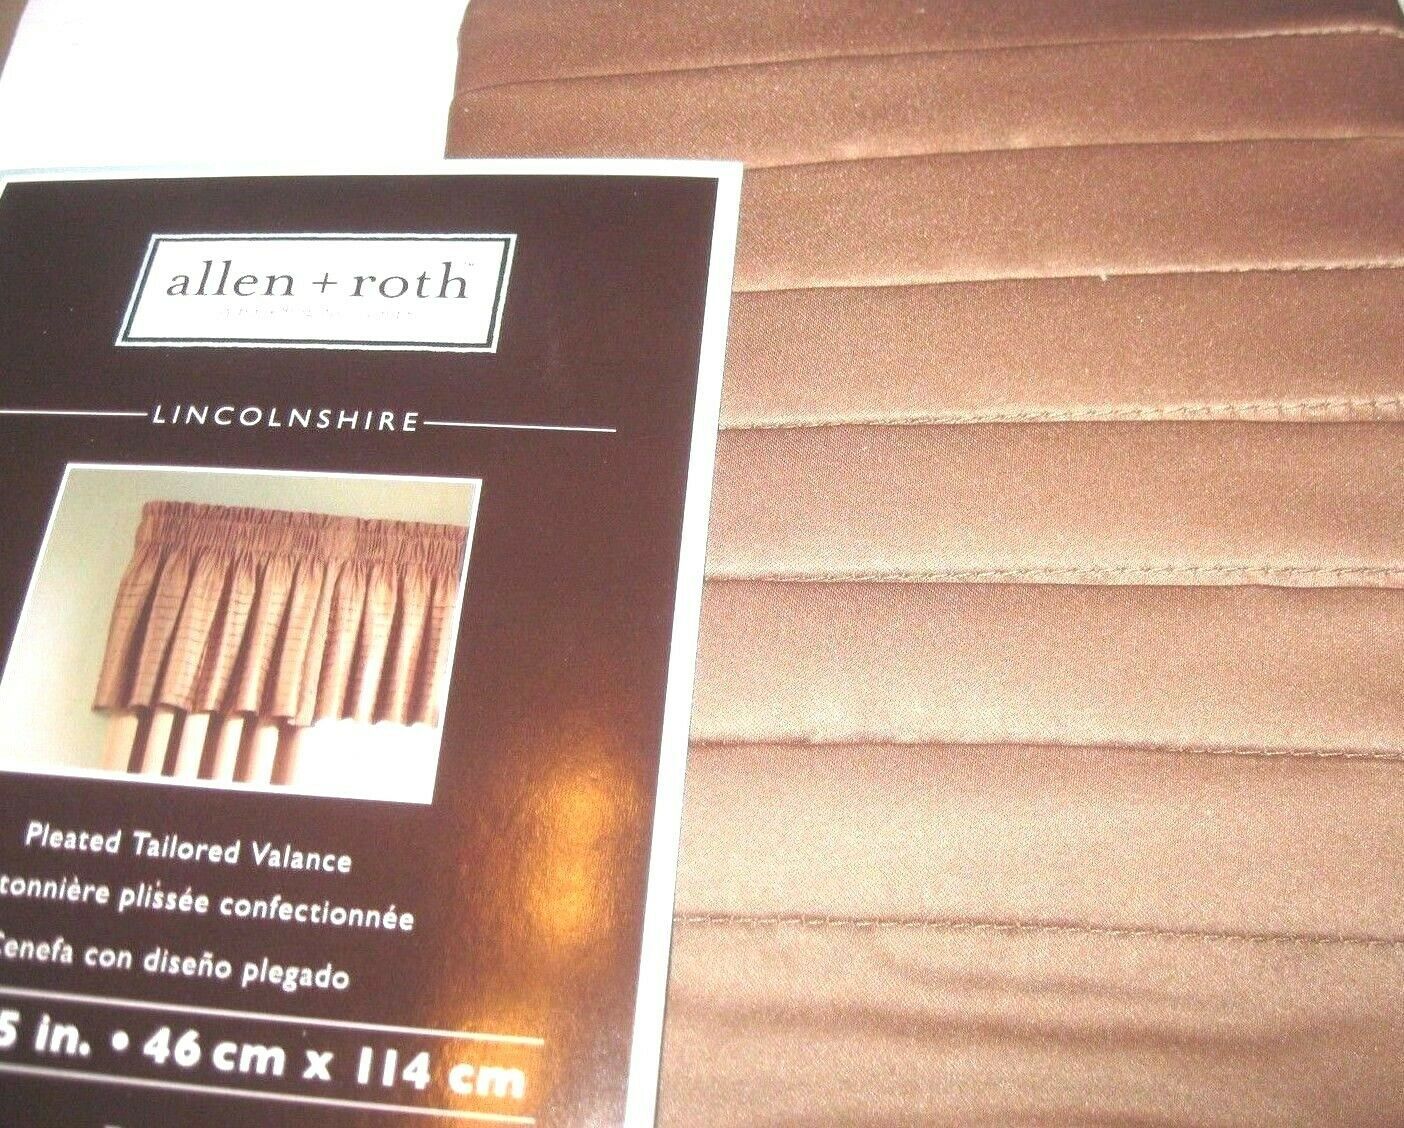 Allen Roth Lincolnshire Valance Pleated Tailored Window TAN 18 x 45 FREE SHIP - $18.80